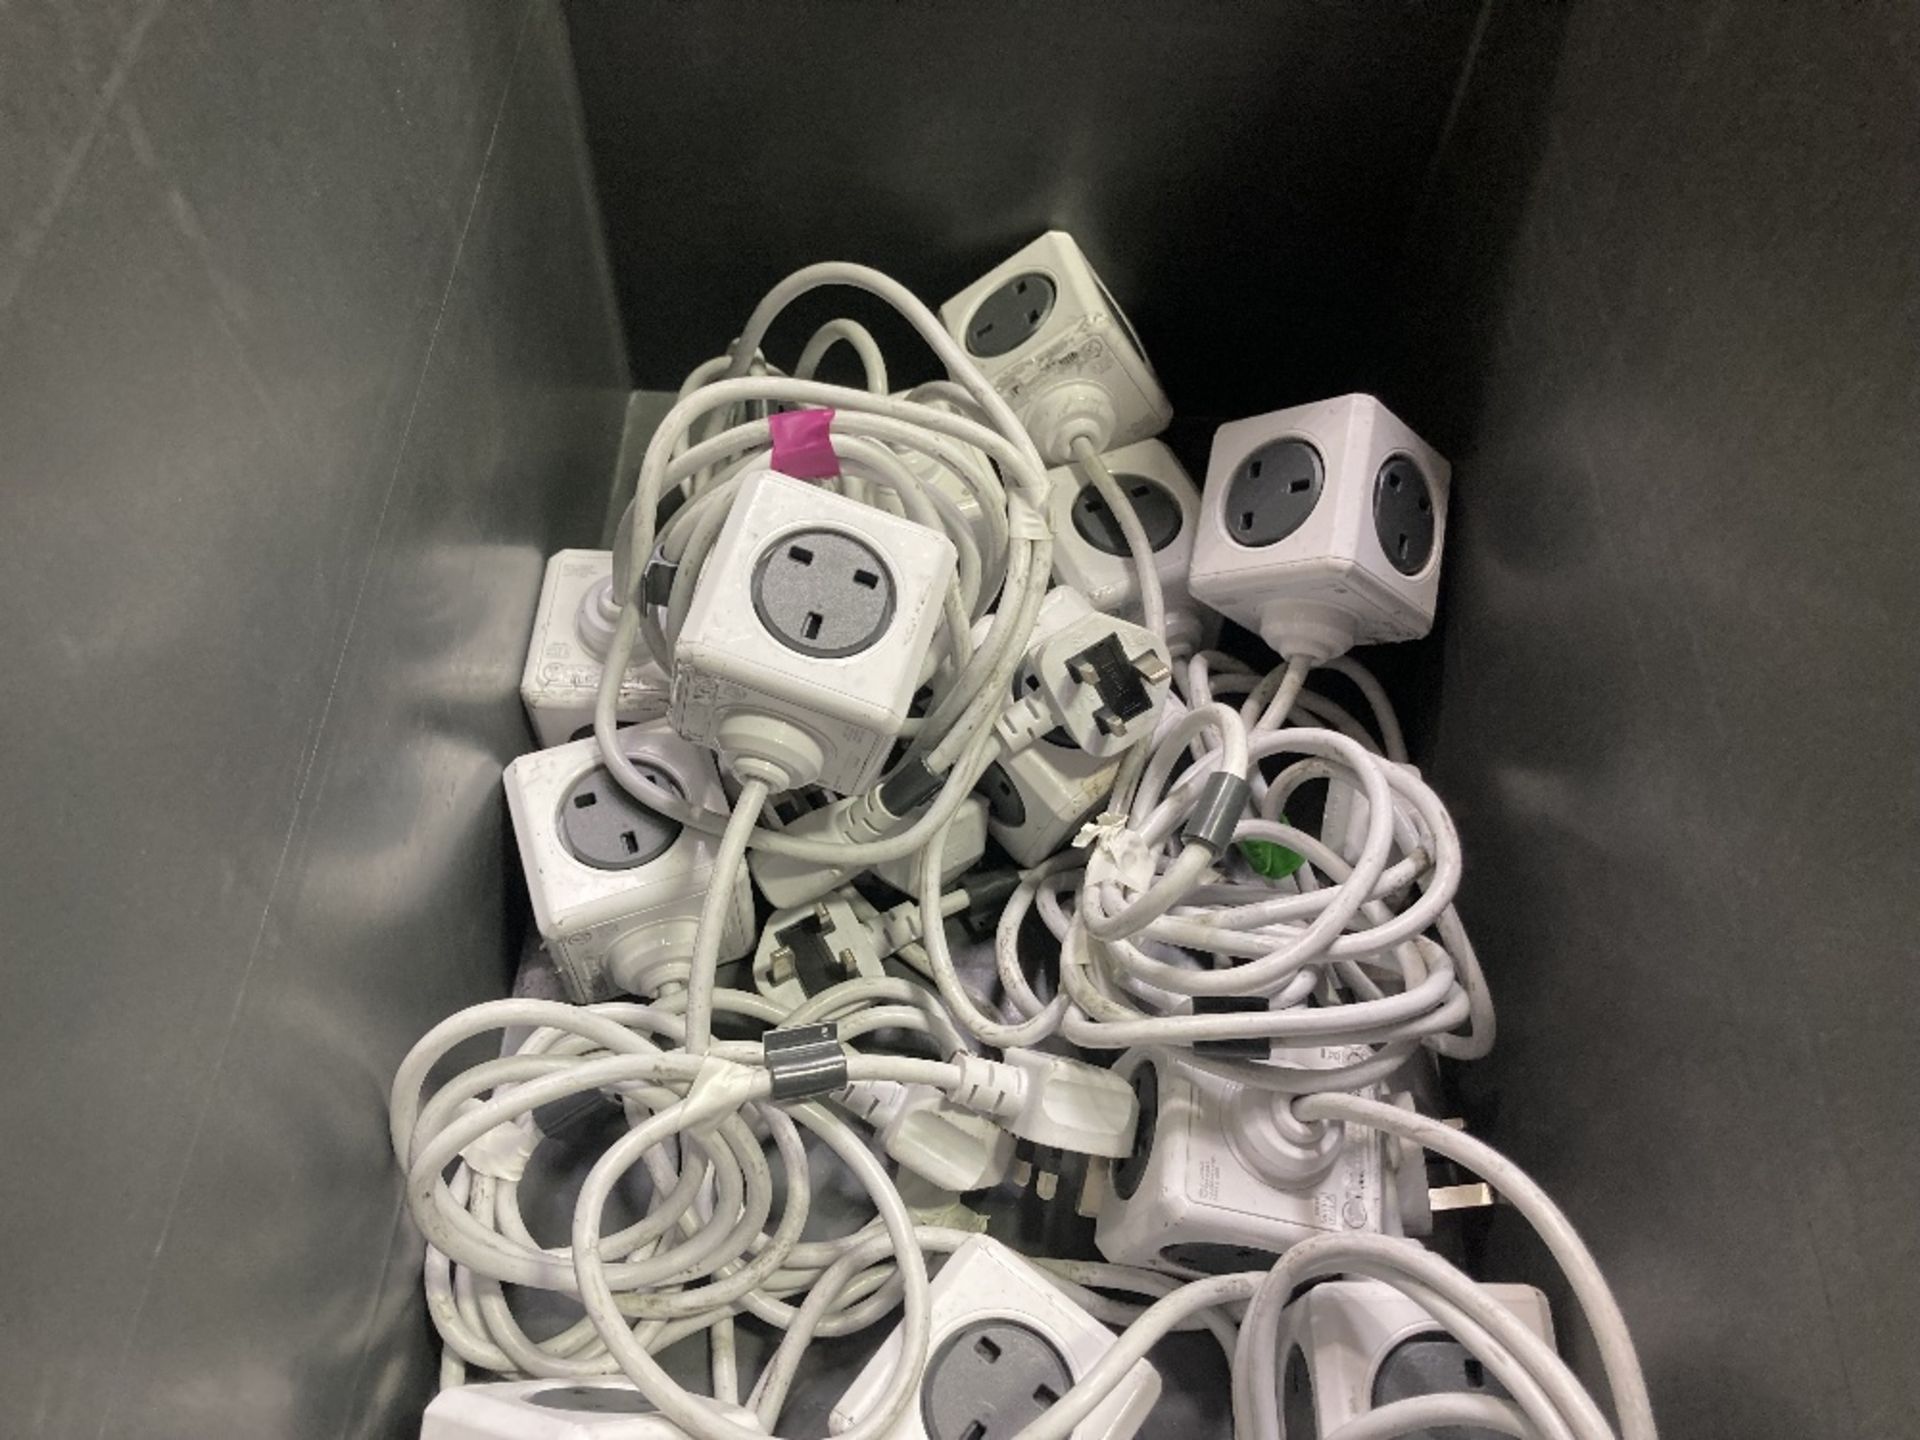 Large Quantity Of 13amp 4-Way Powercube + 2x USB Cable Adapters With Plastic Lin Bins - Image 3 of 8